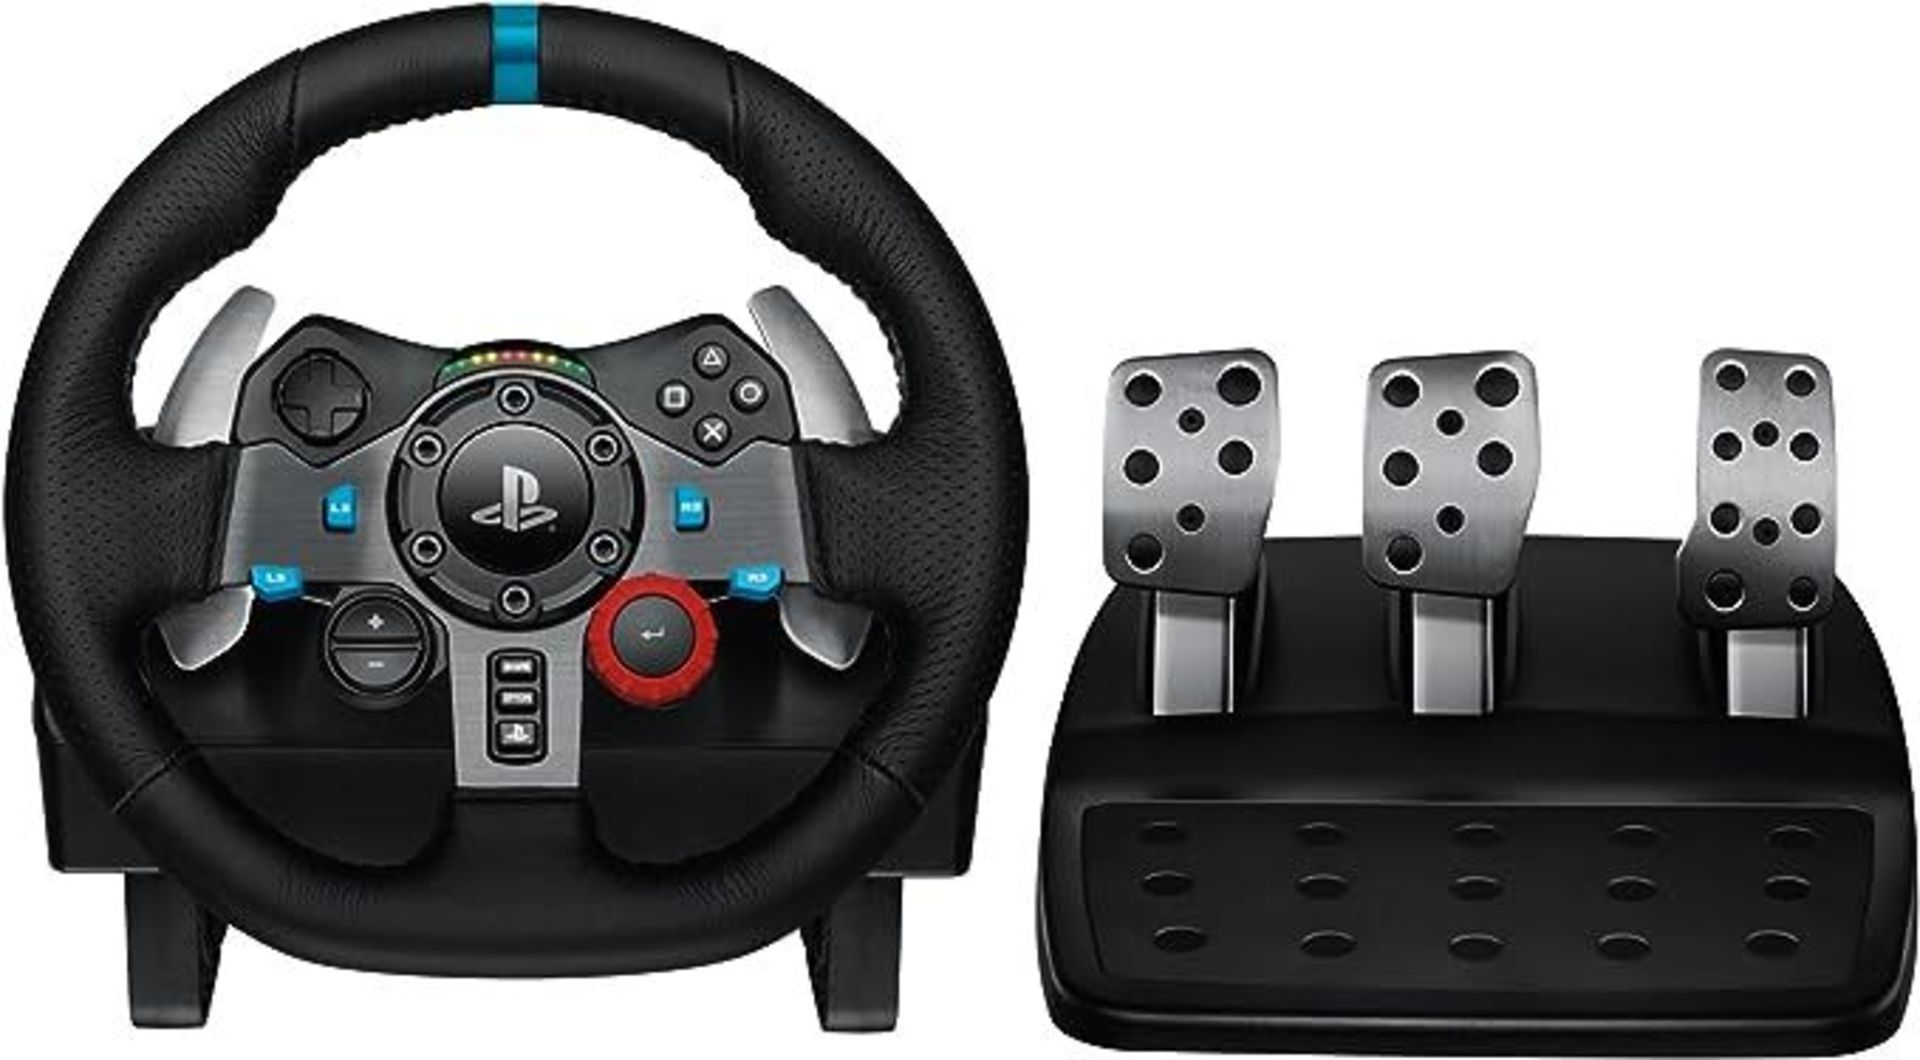 Logitech G29 Driving Force Racing Wheel and Floor Pedals, Real Force Feedback, Stainless Steel